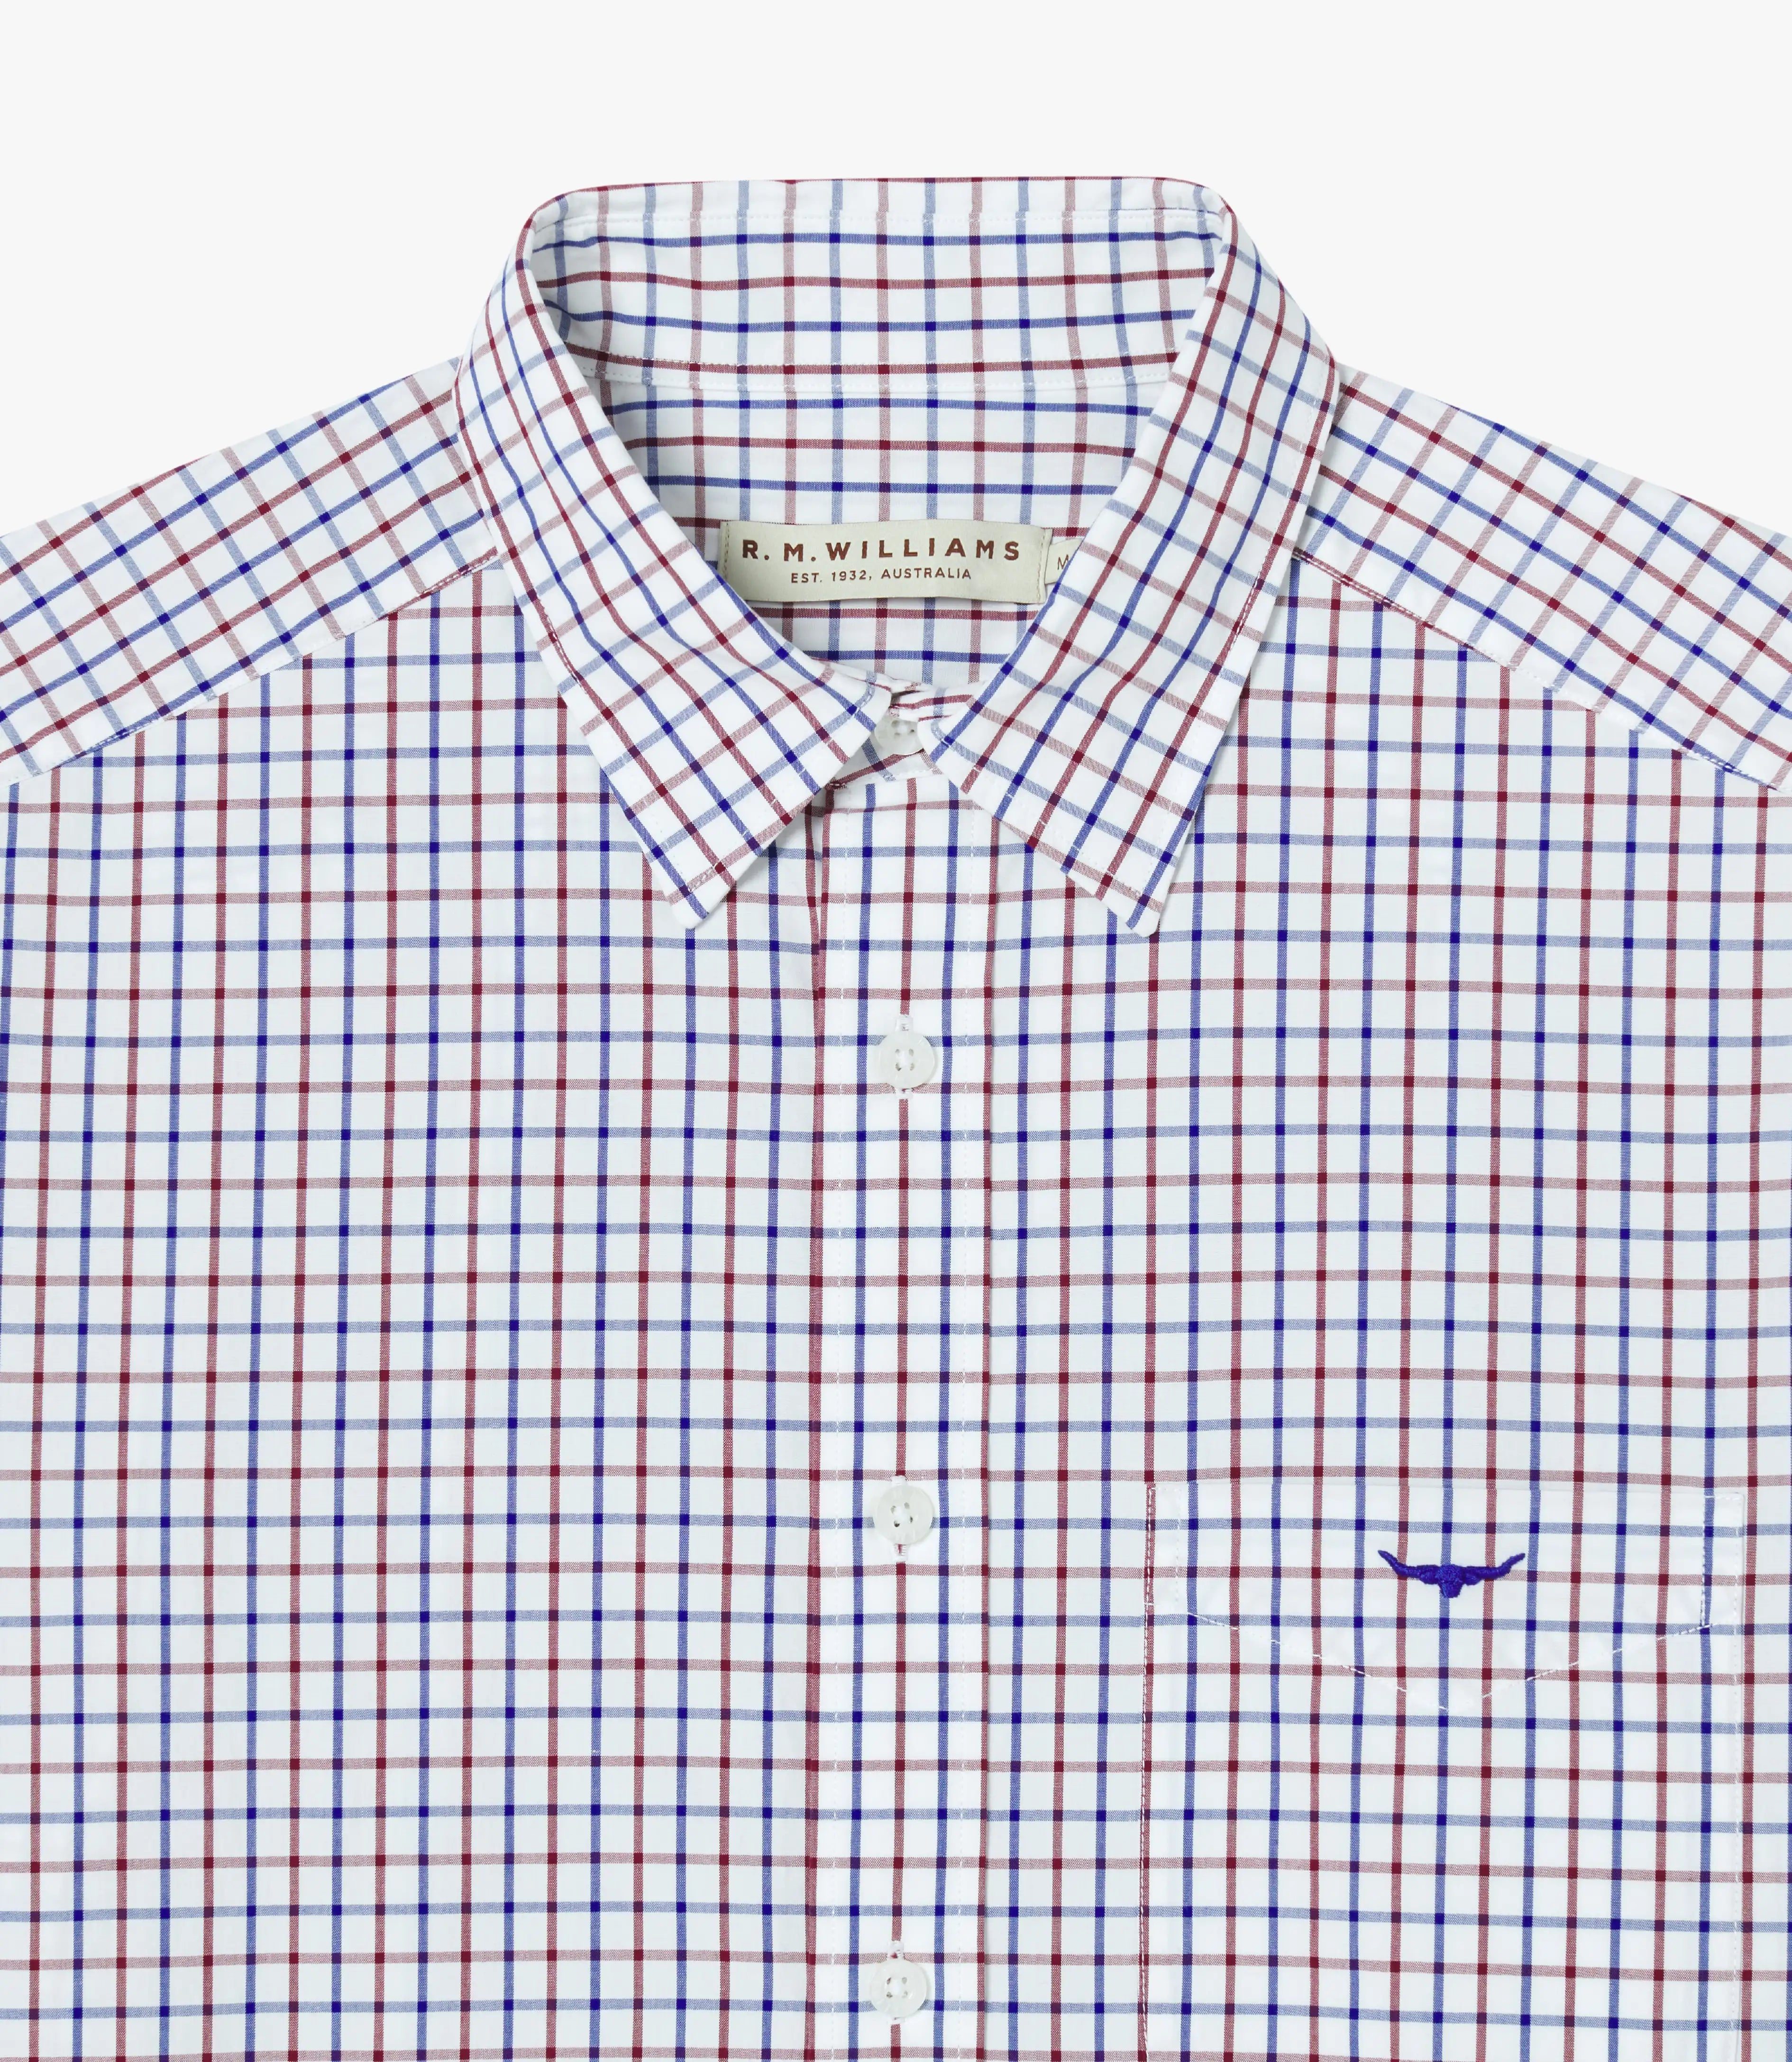 RMWilliams Collins Shirt in Navy, Burgundy & White